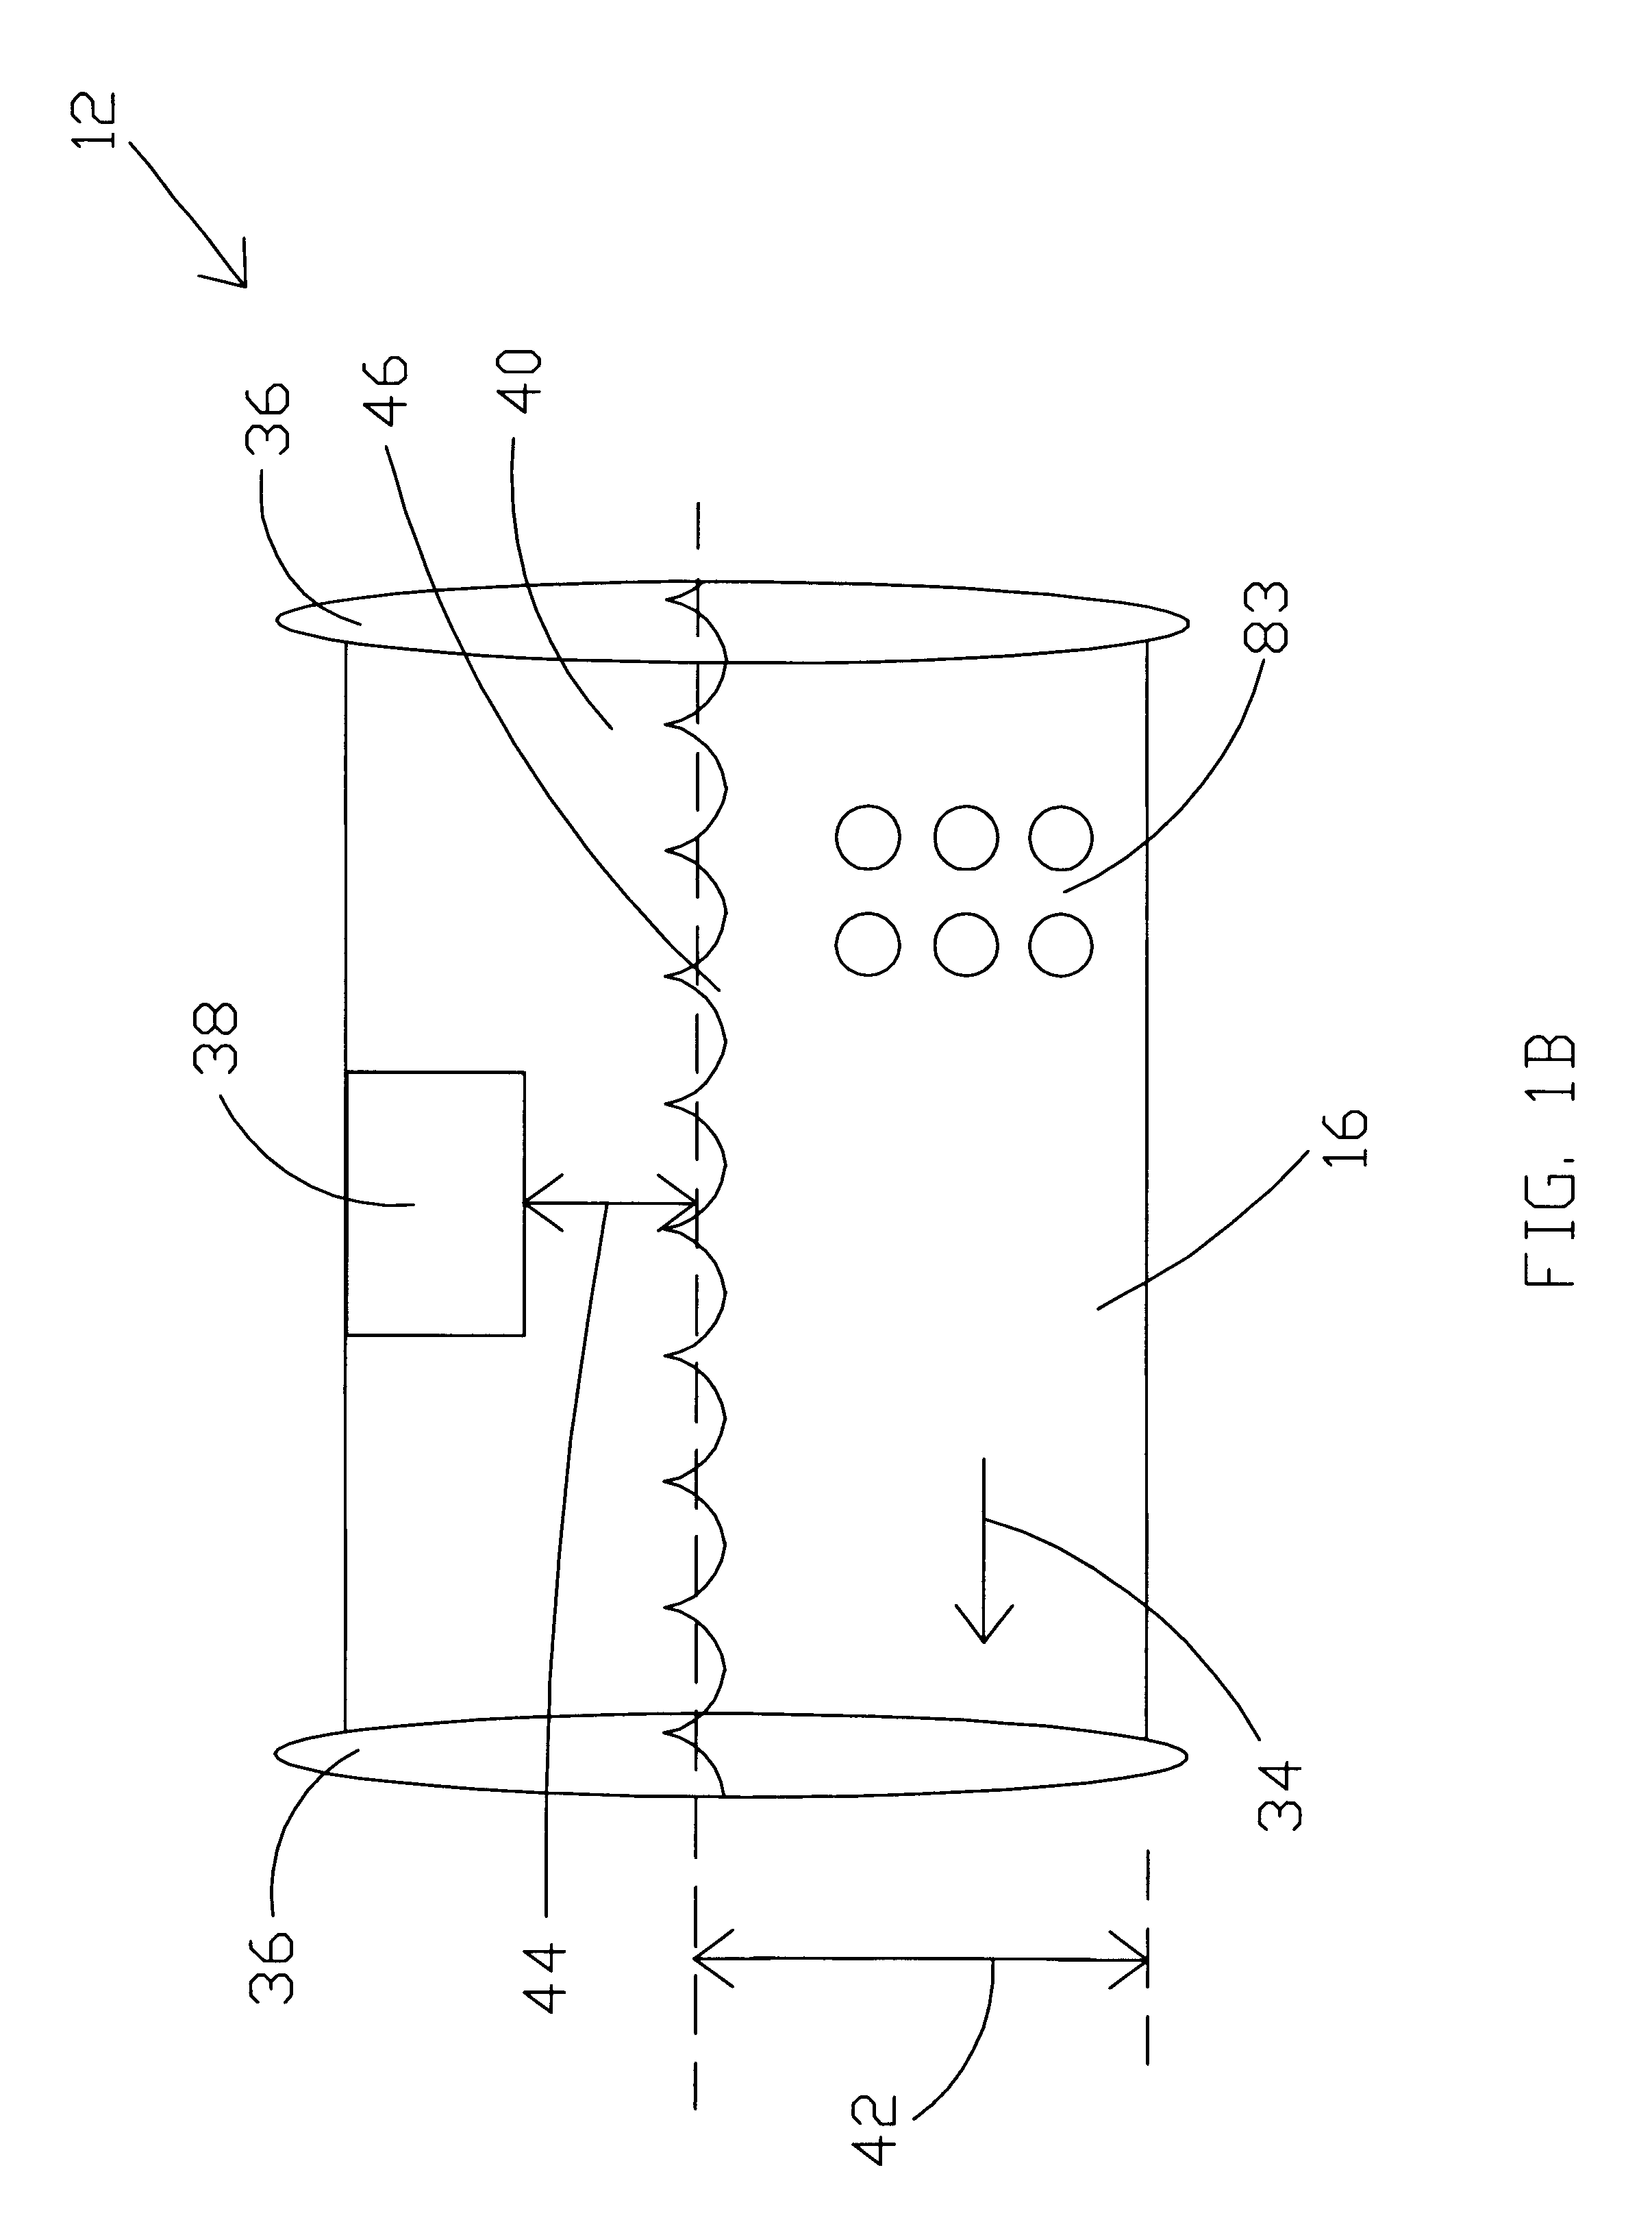 Measurement system and method